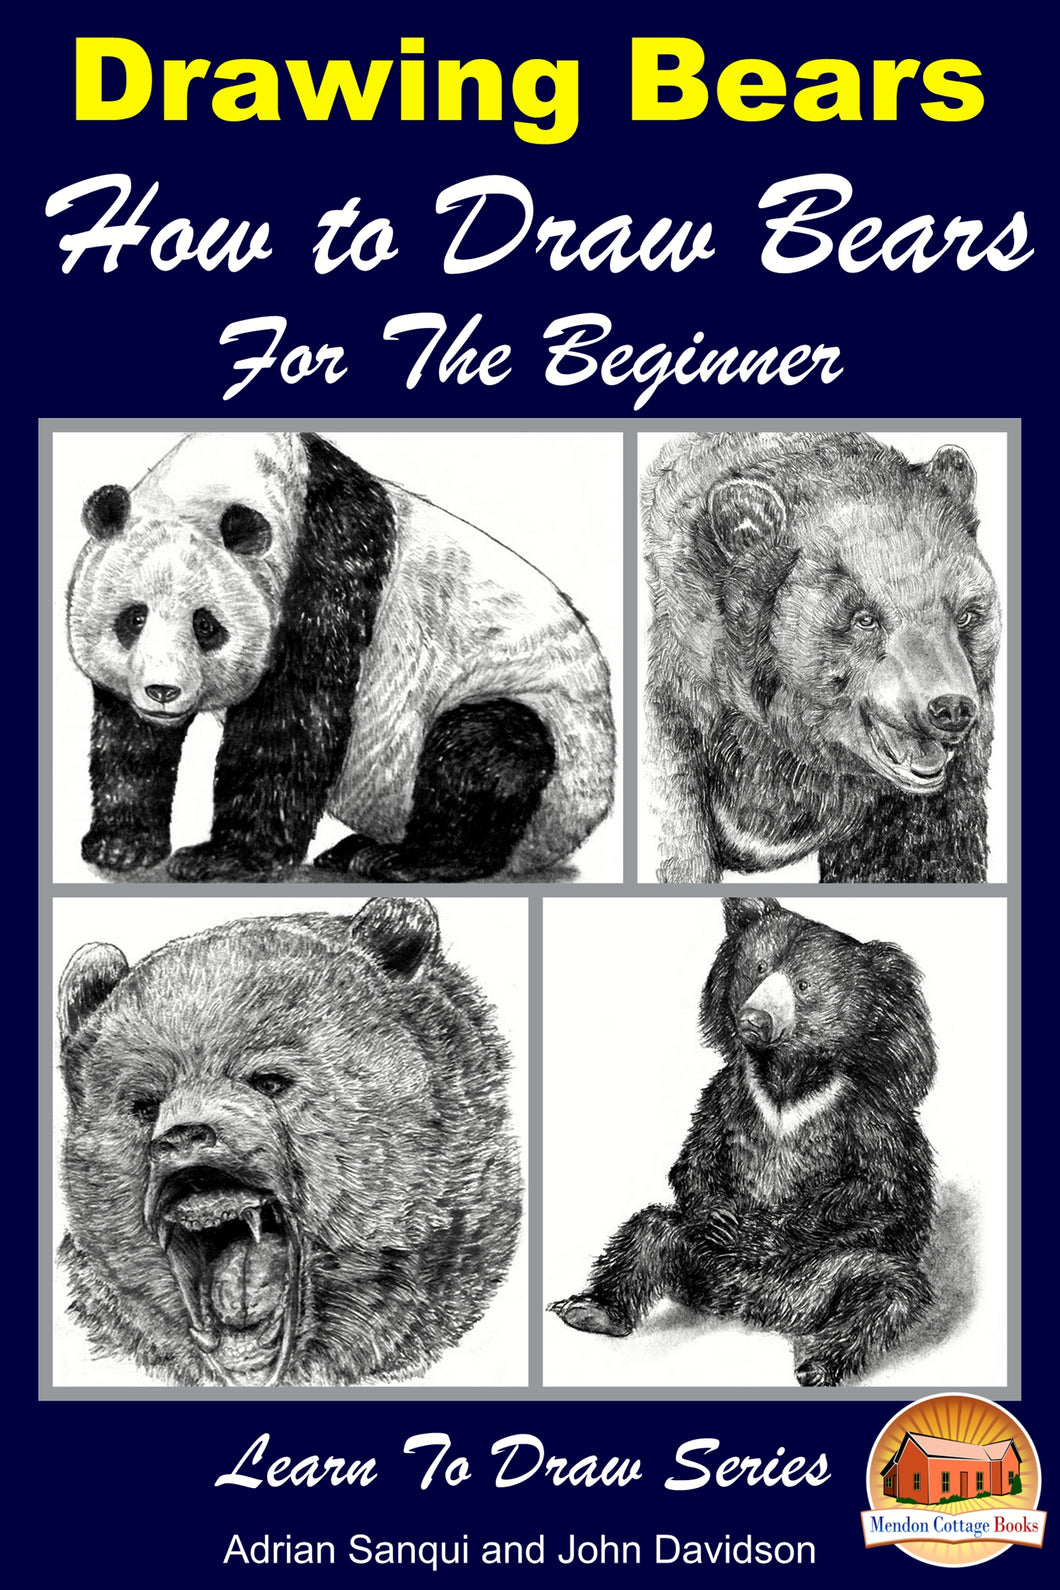 Drawing Bears : How to Draw Bears For the Beginner